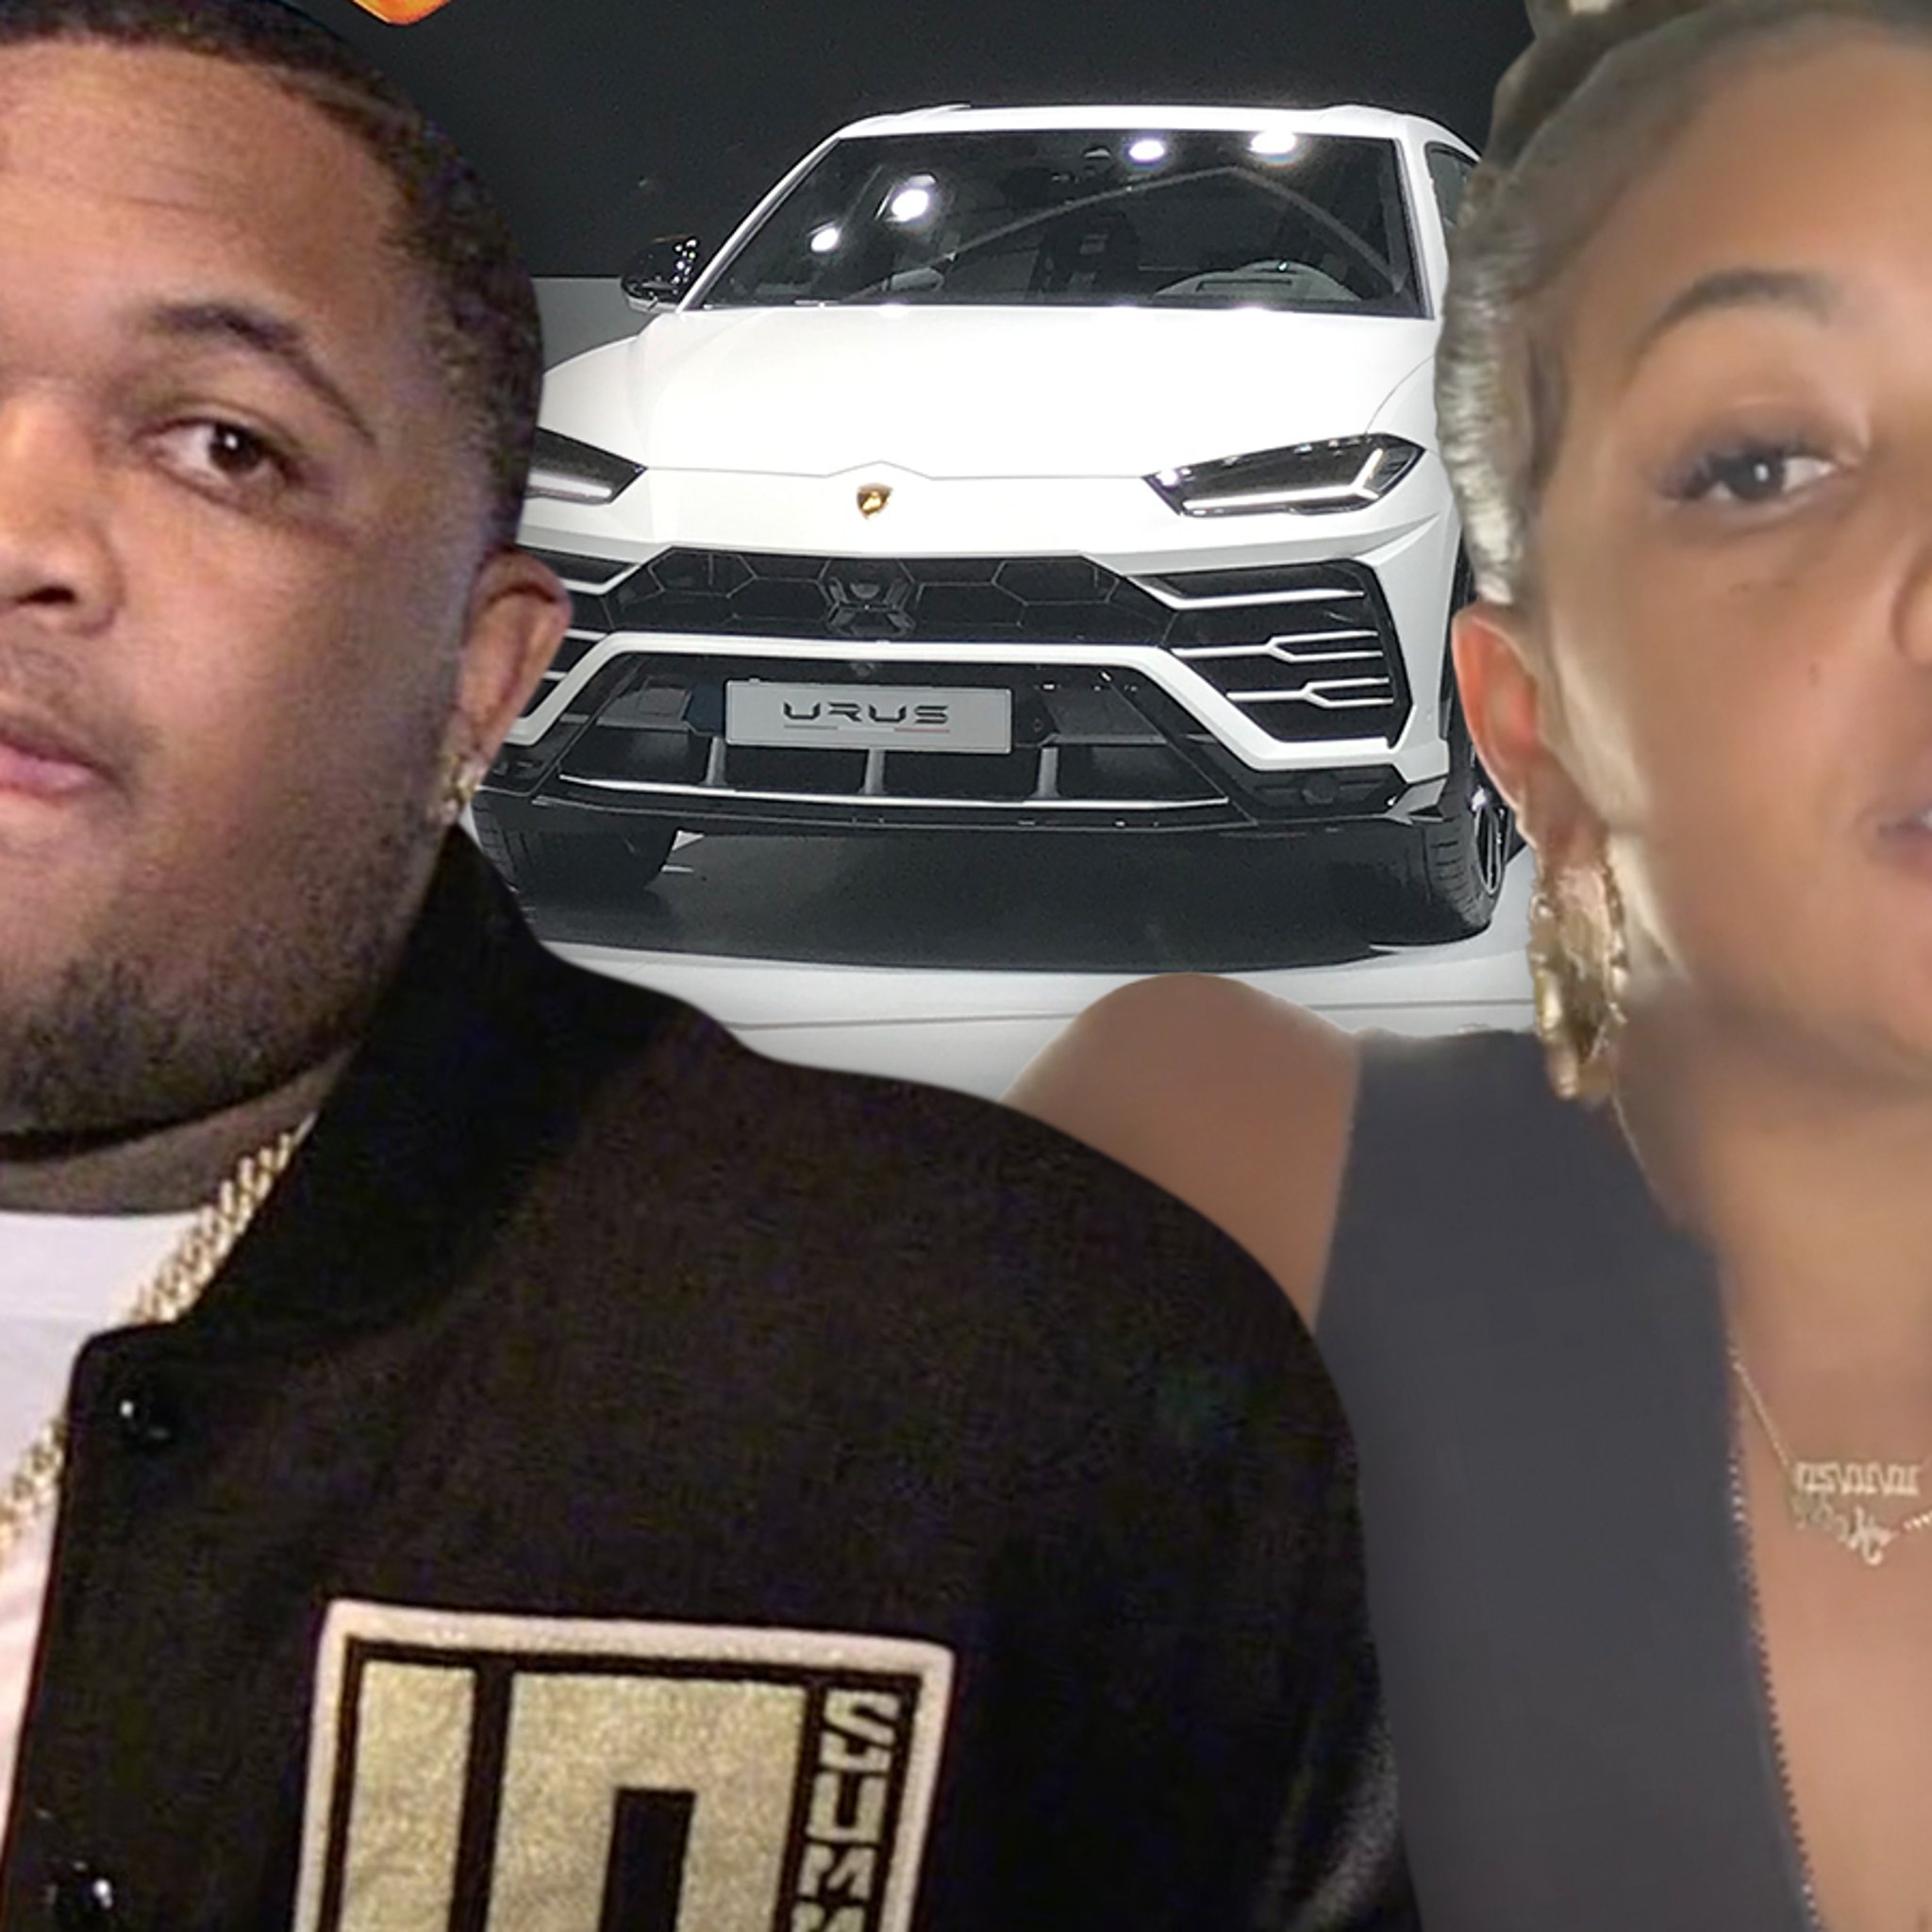 Mustard's Ex-Wife Rips Producer for 3 Kids, Lamborghini Situation